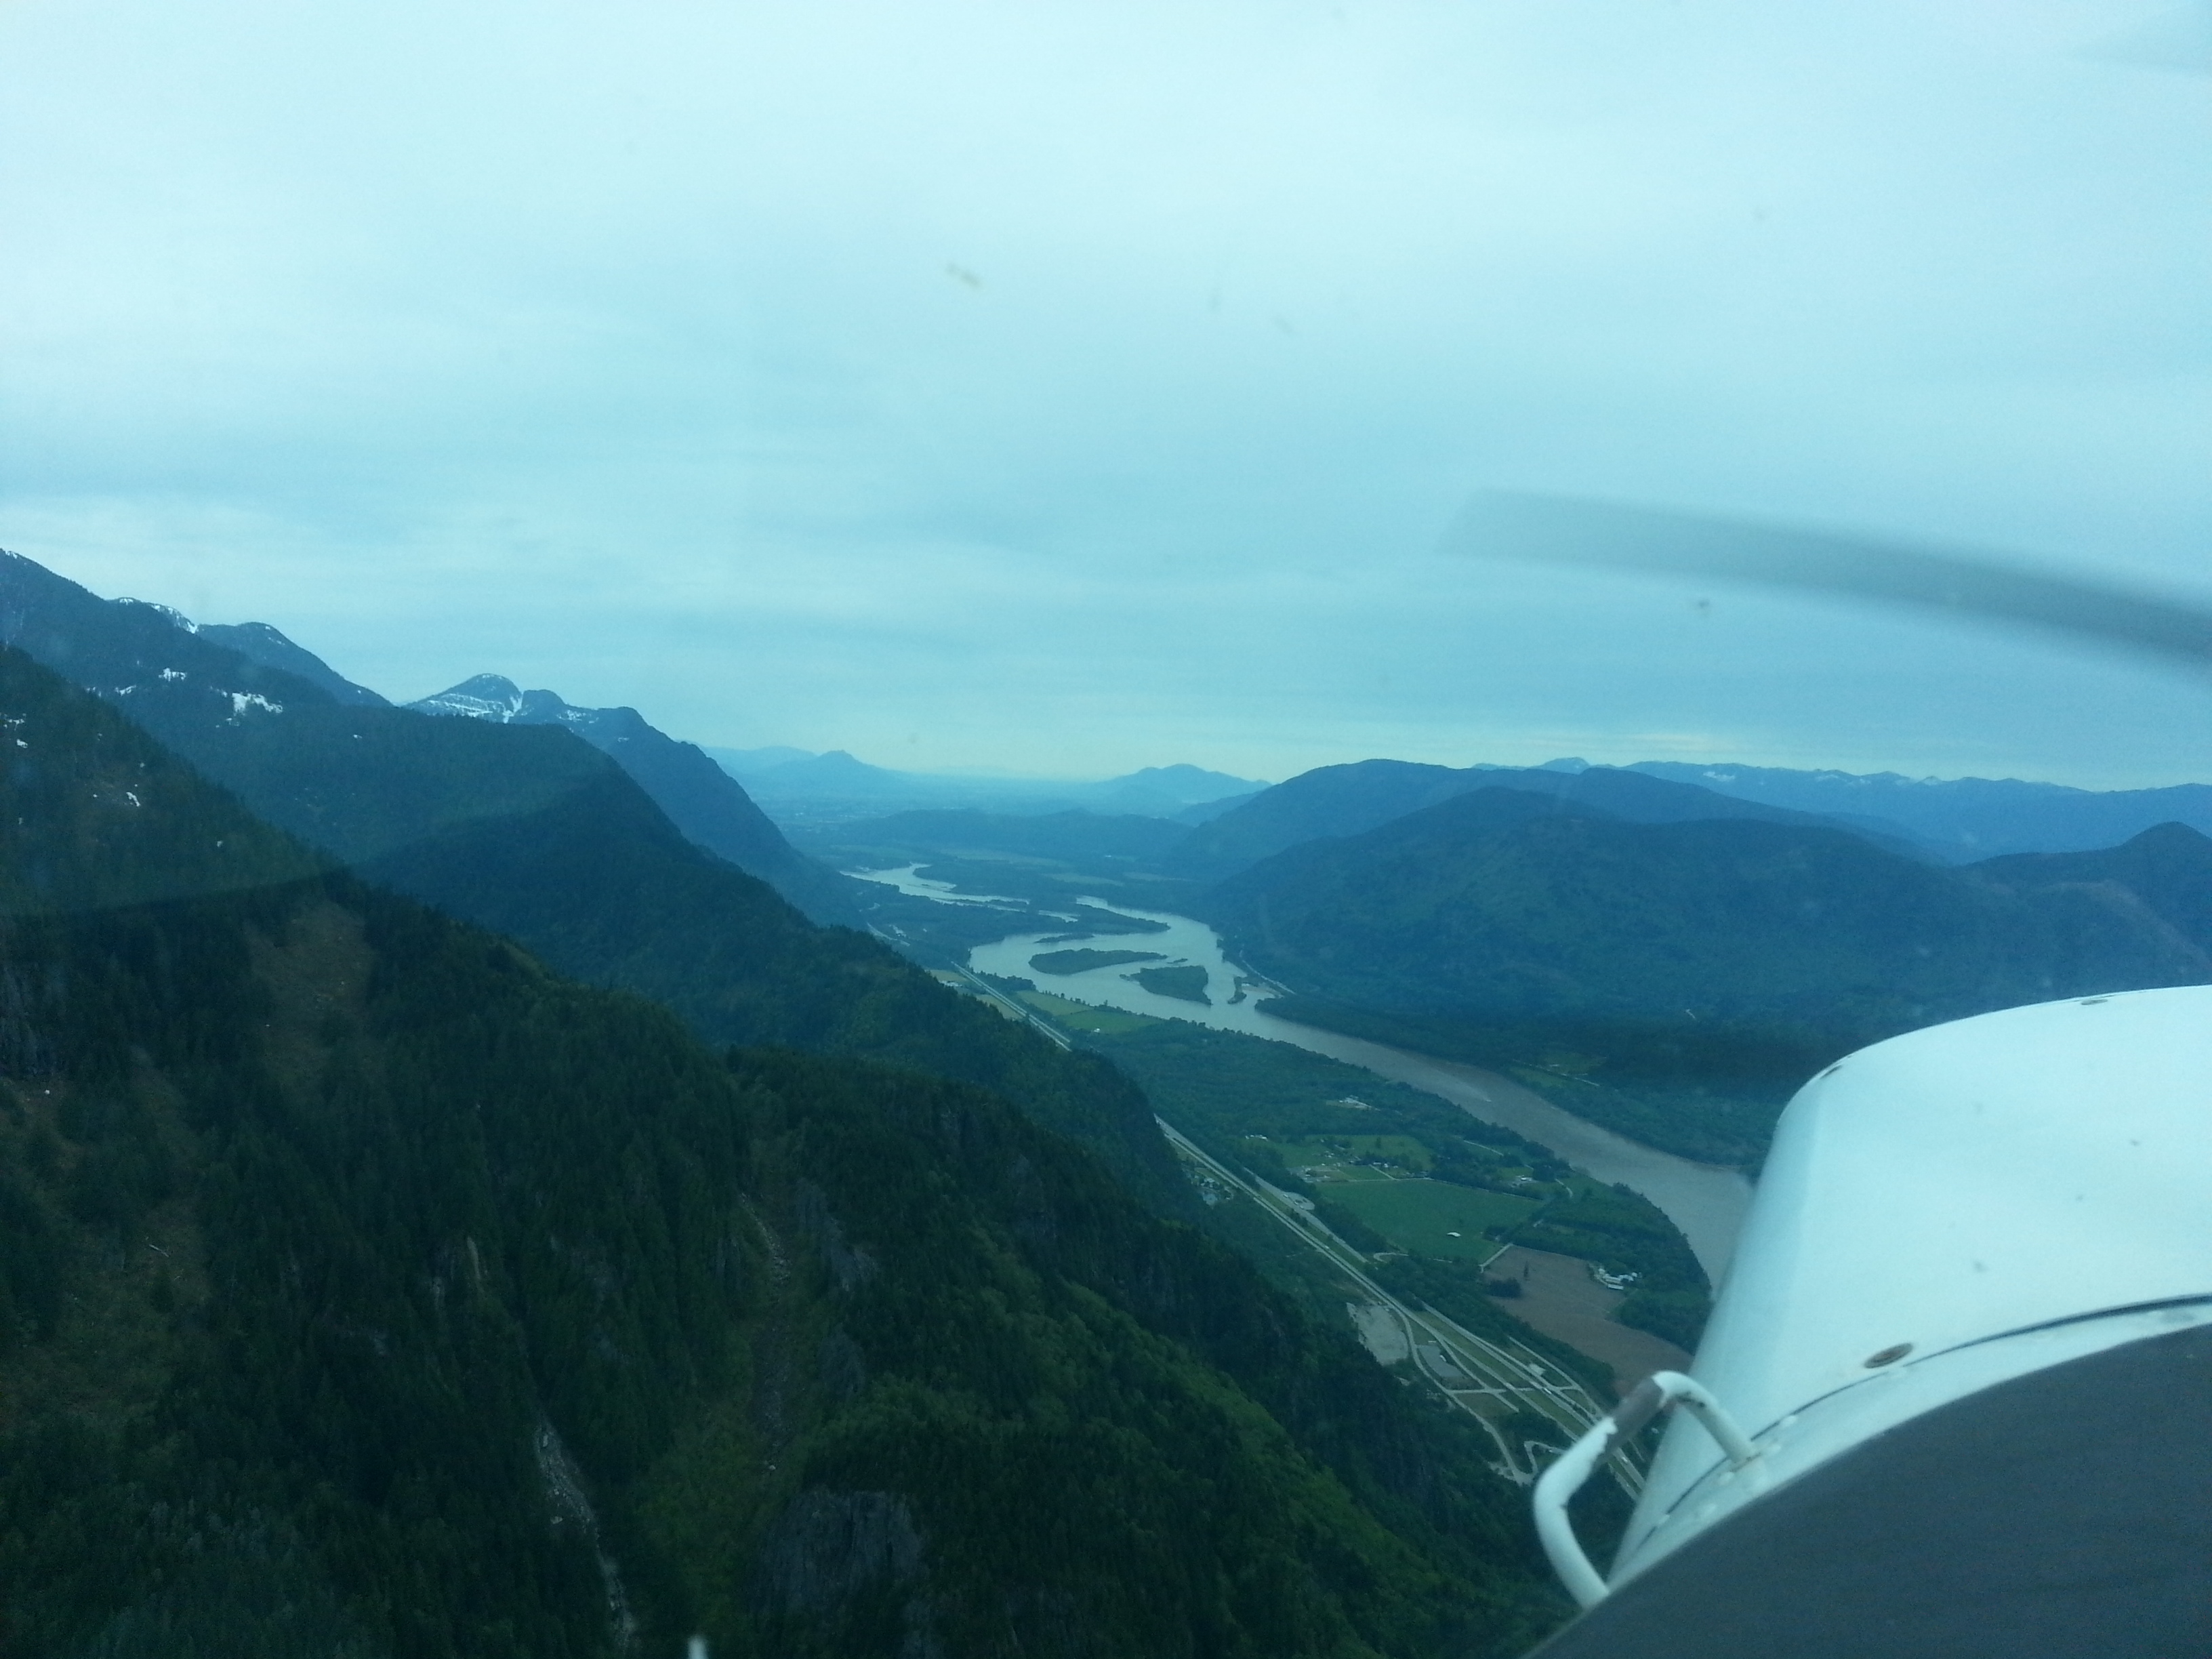 Over CYHE, facing back towards the lower mainland